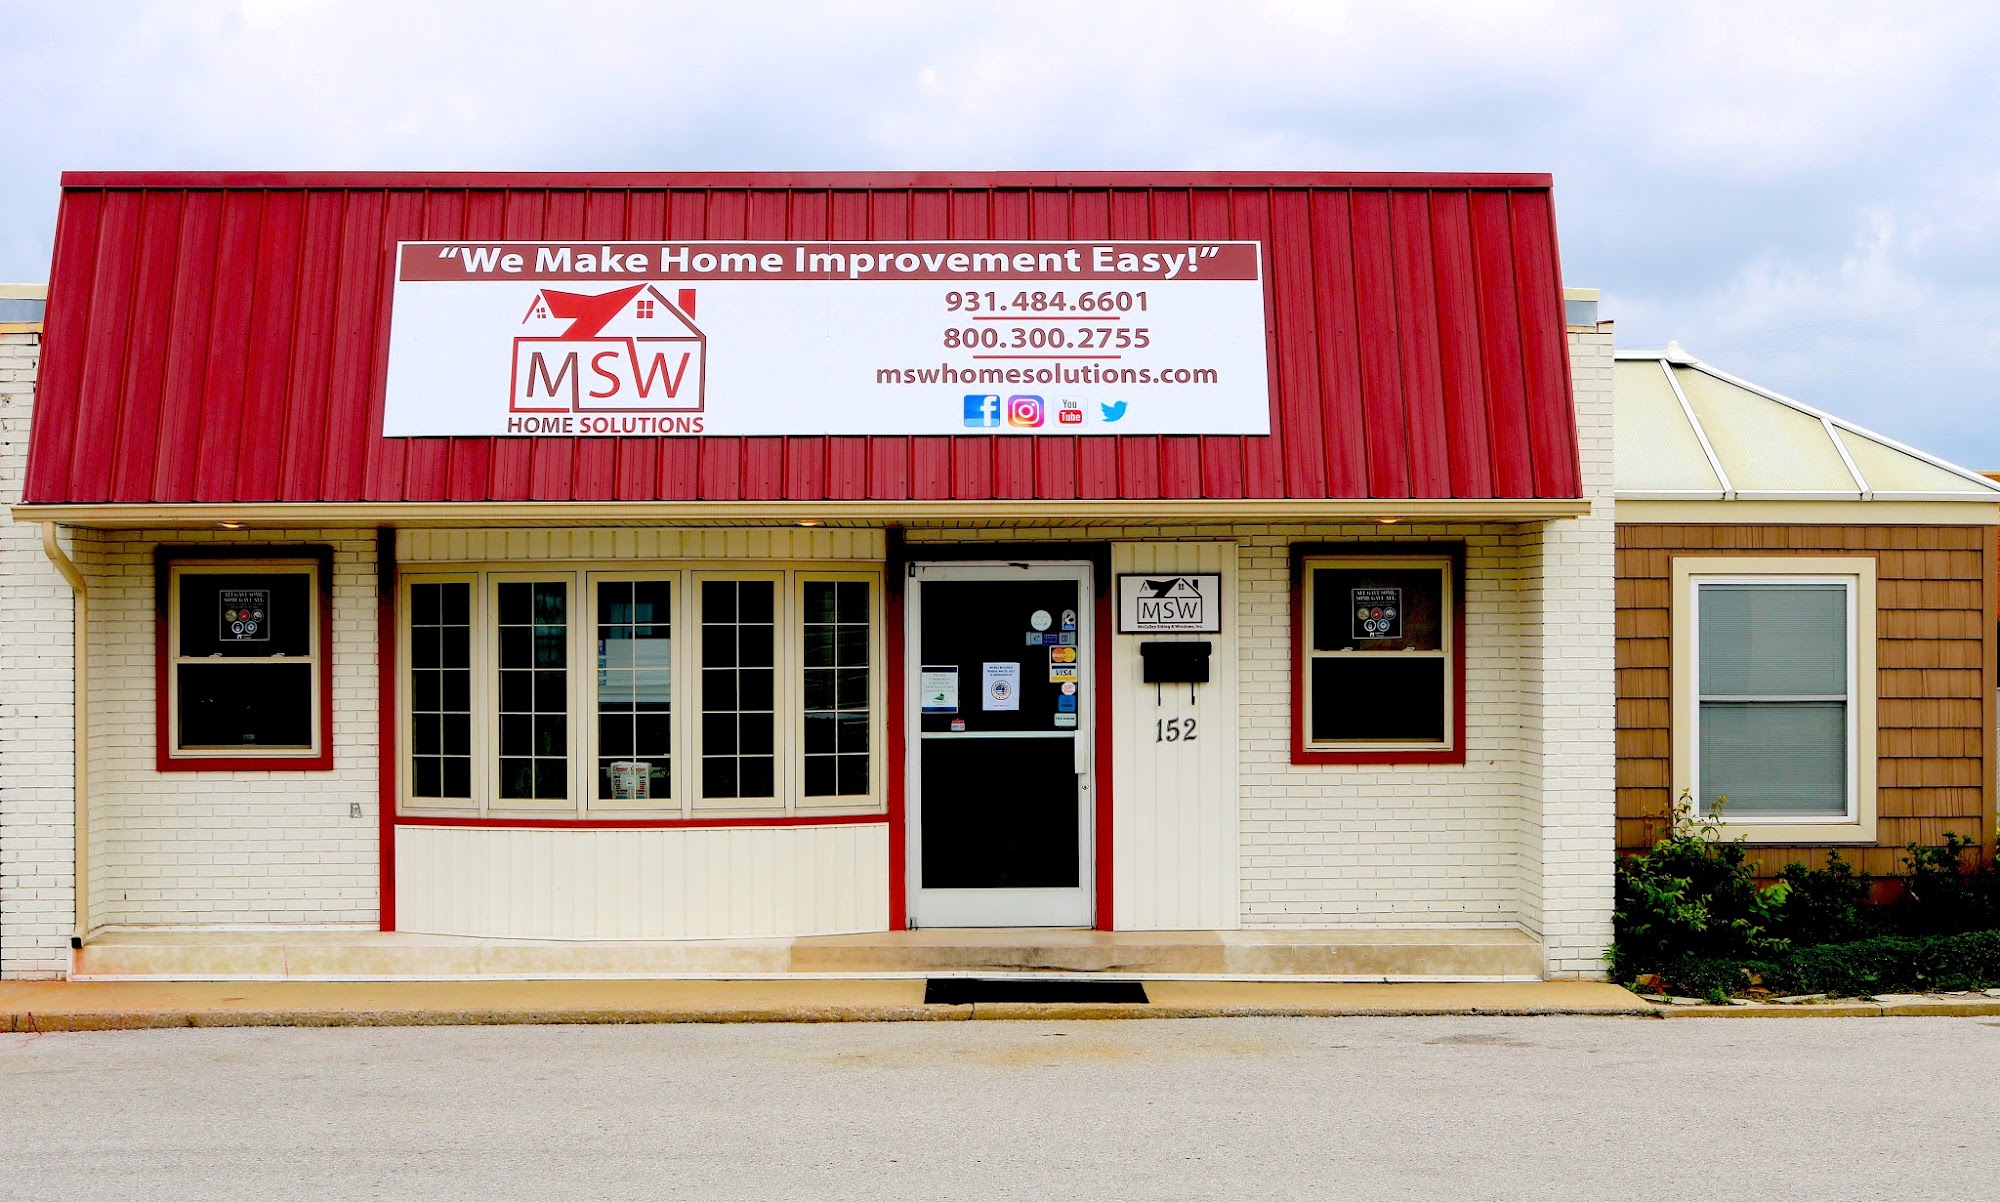 MSW Home Solutions